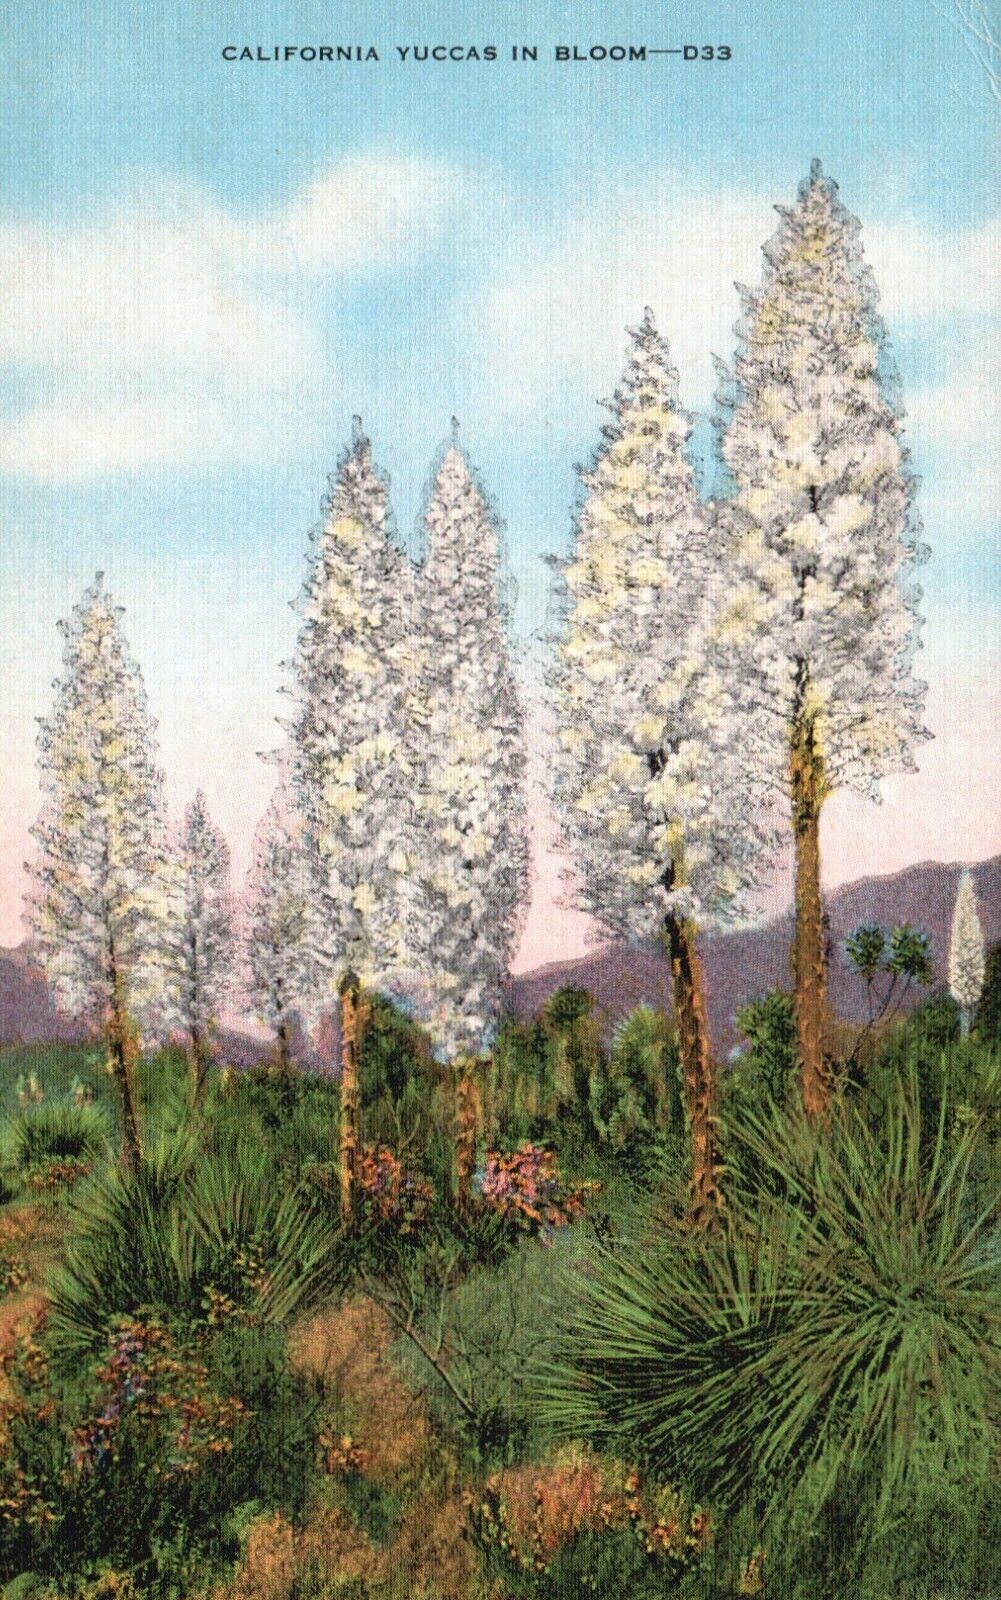 Postcard CA California Yuccas in Bloom Posted 1948 Linen Vintage PC J3397